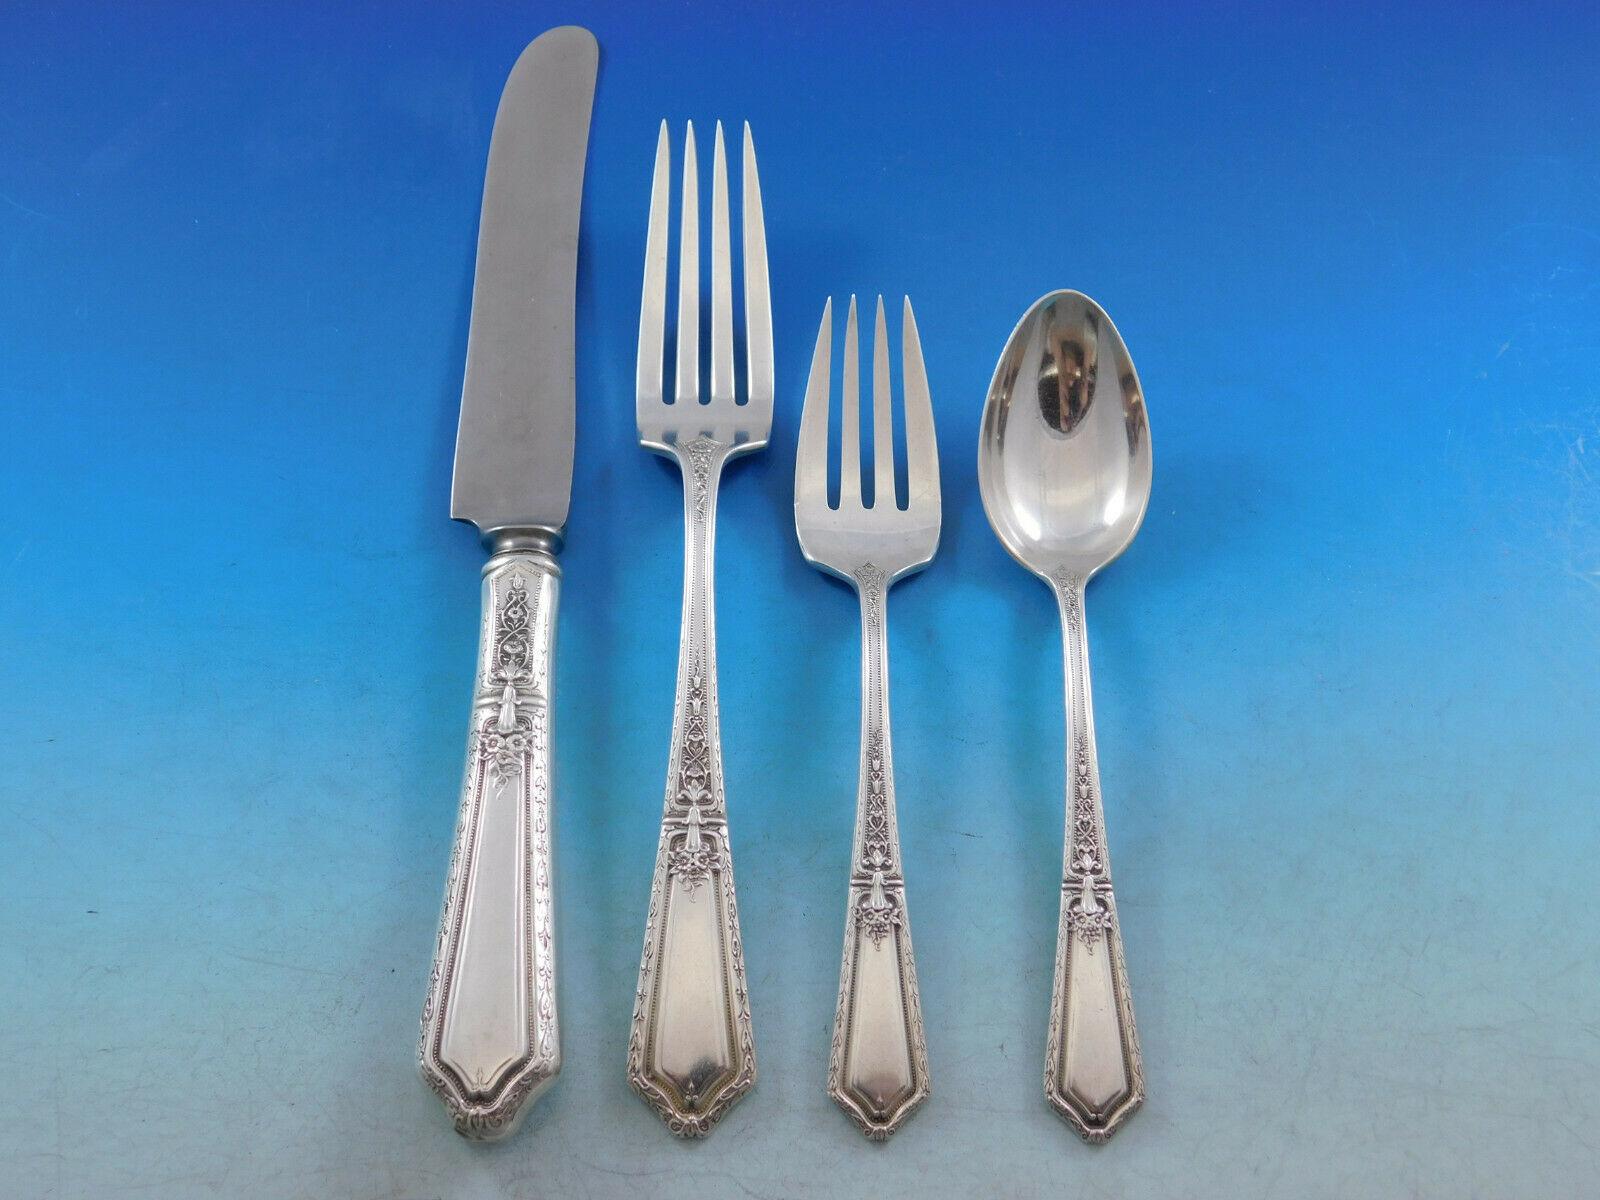 Dinner Size D'Orleans by Towle Sterling Silver Flatware set - 60 pieces. This set includes

8 Dinner Size Knives, 9 5/8